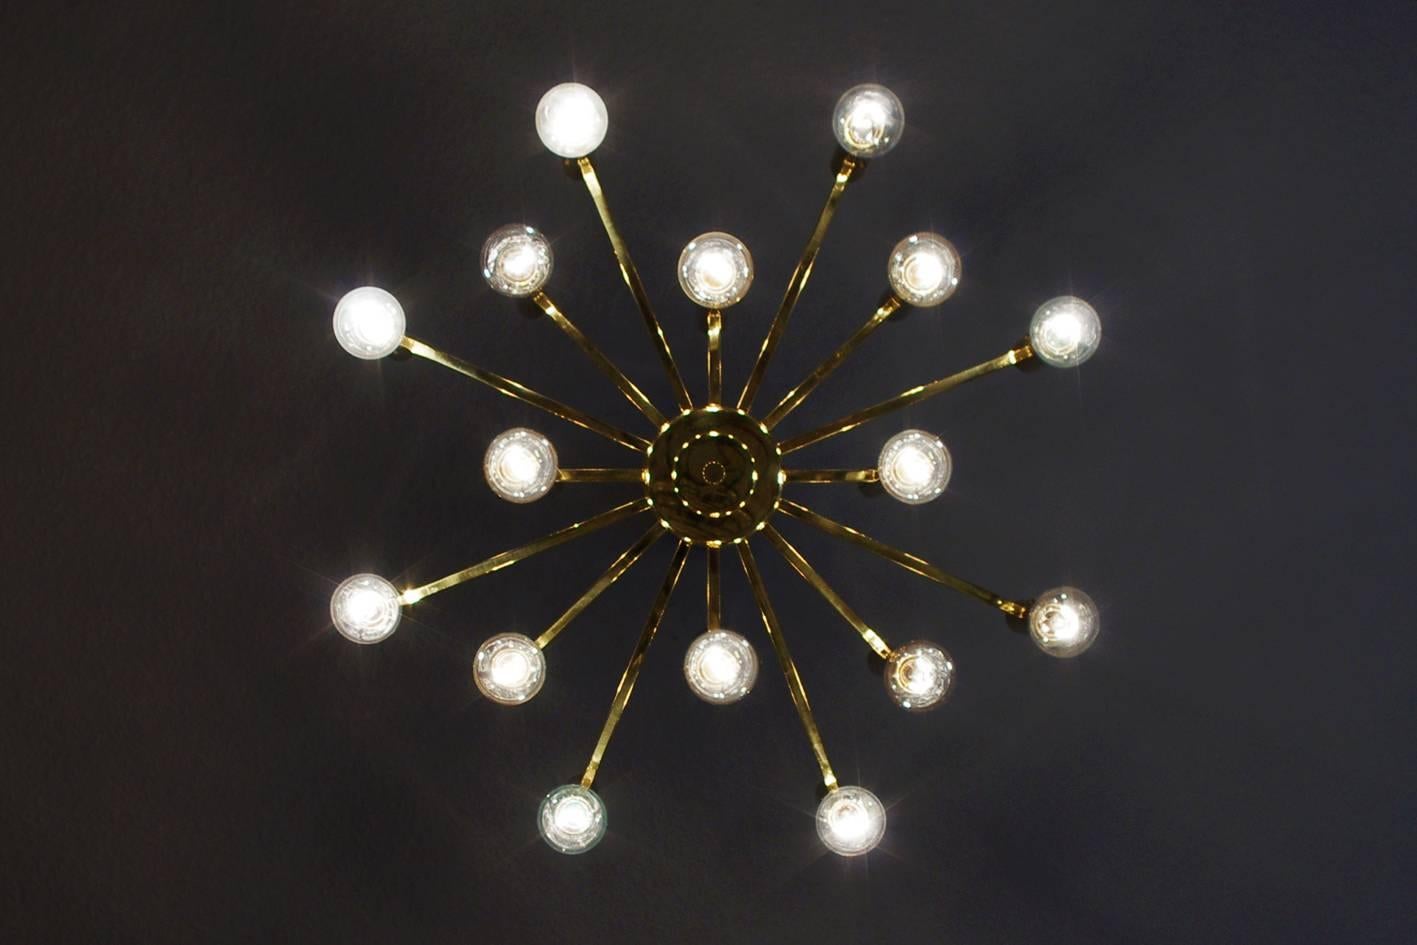 Wonderful vintage 16 Arm modernist Sciolari chandelier.
Italy, 1960s.
Measure: Diameter 20 In
Height (body without bulbs) 9.5 In

